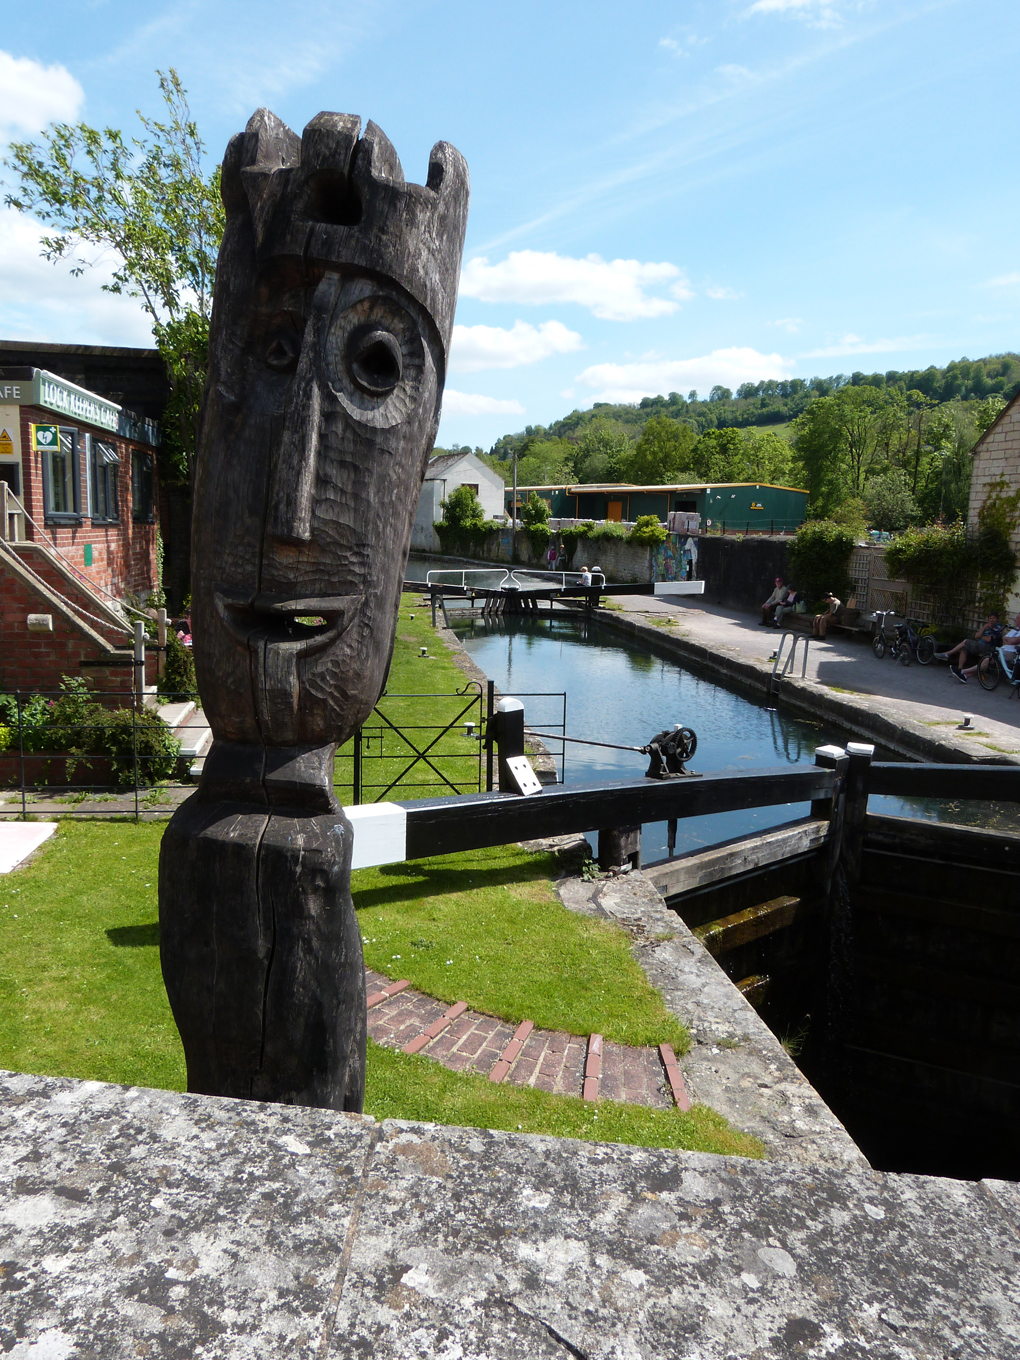 A carved wooden statue overlooks the Wallbridge Upper Lock outside the Lock Keepers Cafe, Stroud. The statue is in the foreground, and the canal and lock recede into the distance.